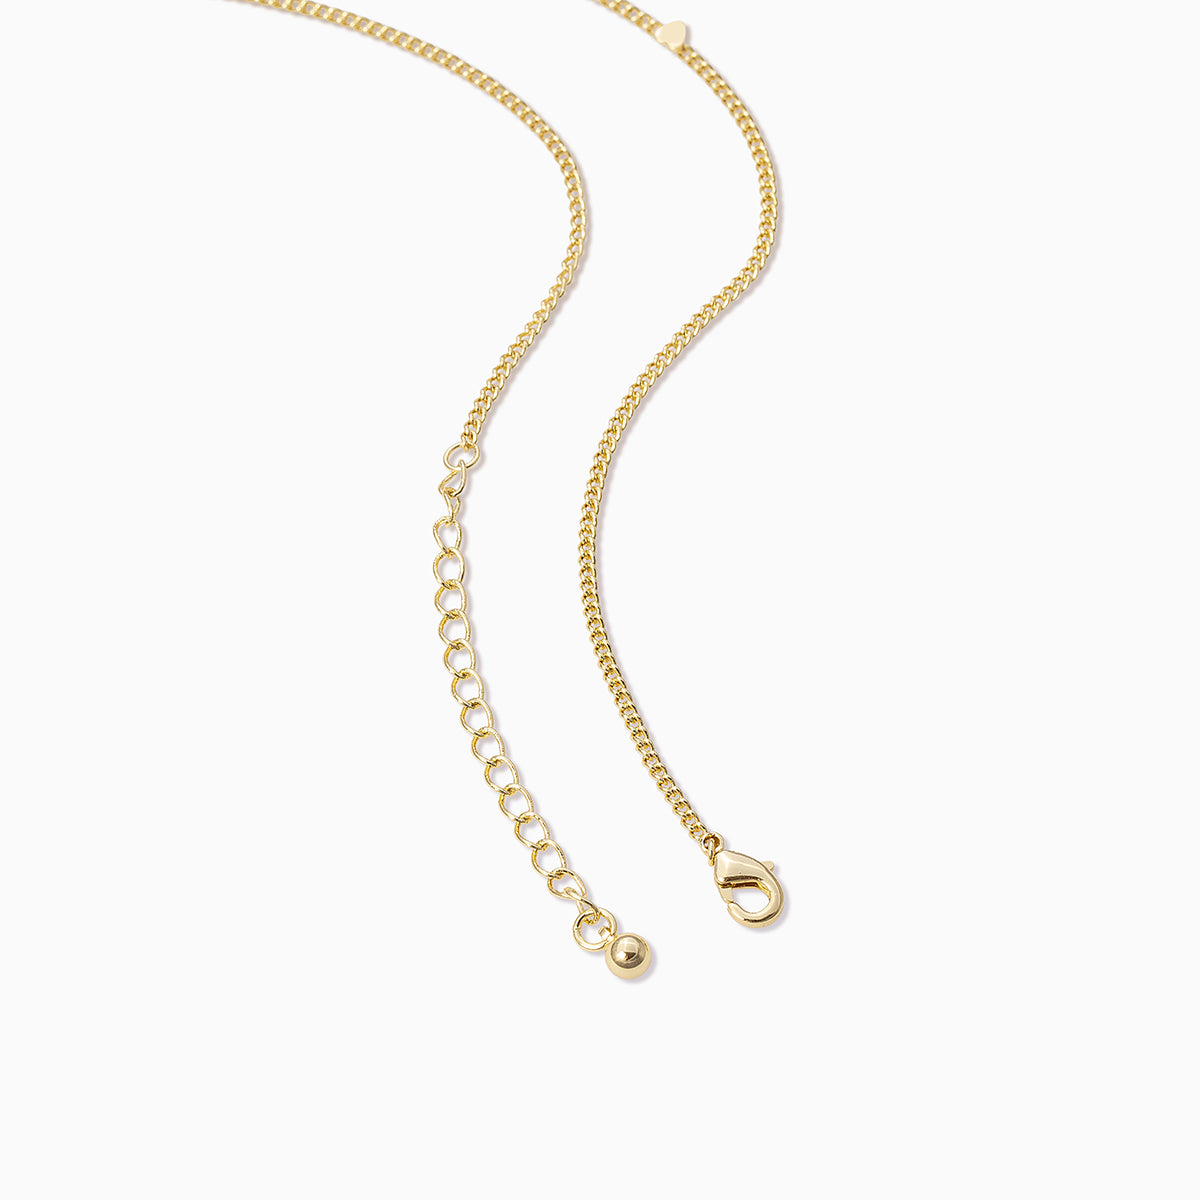 Patterned Heart Chain Choker Necklace in Gold | Uncommon James